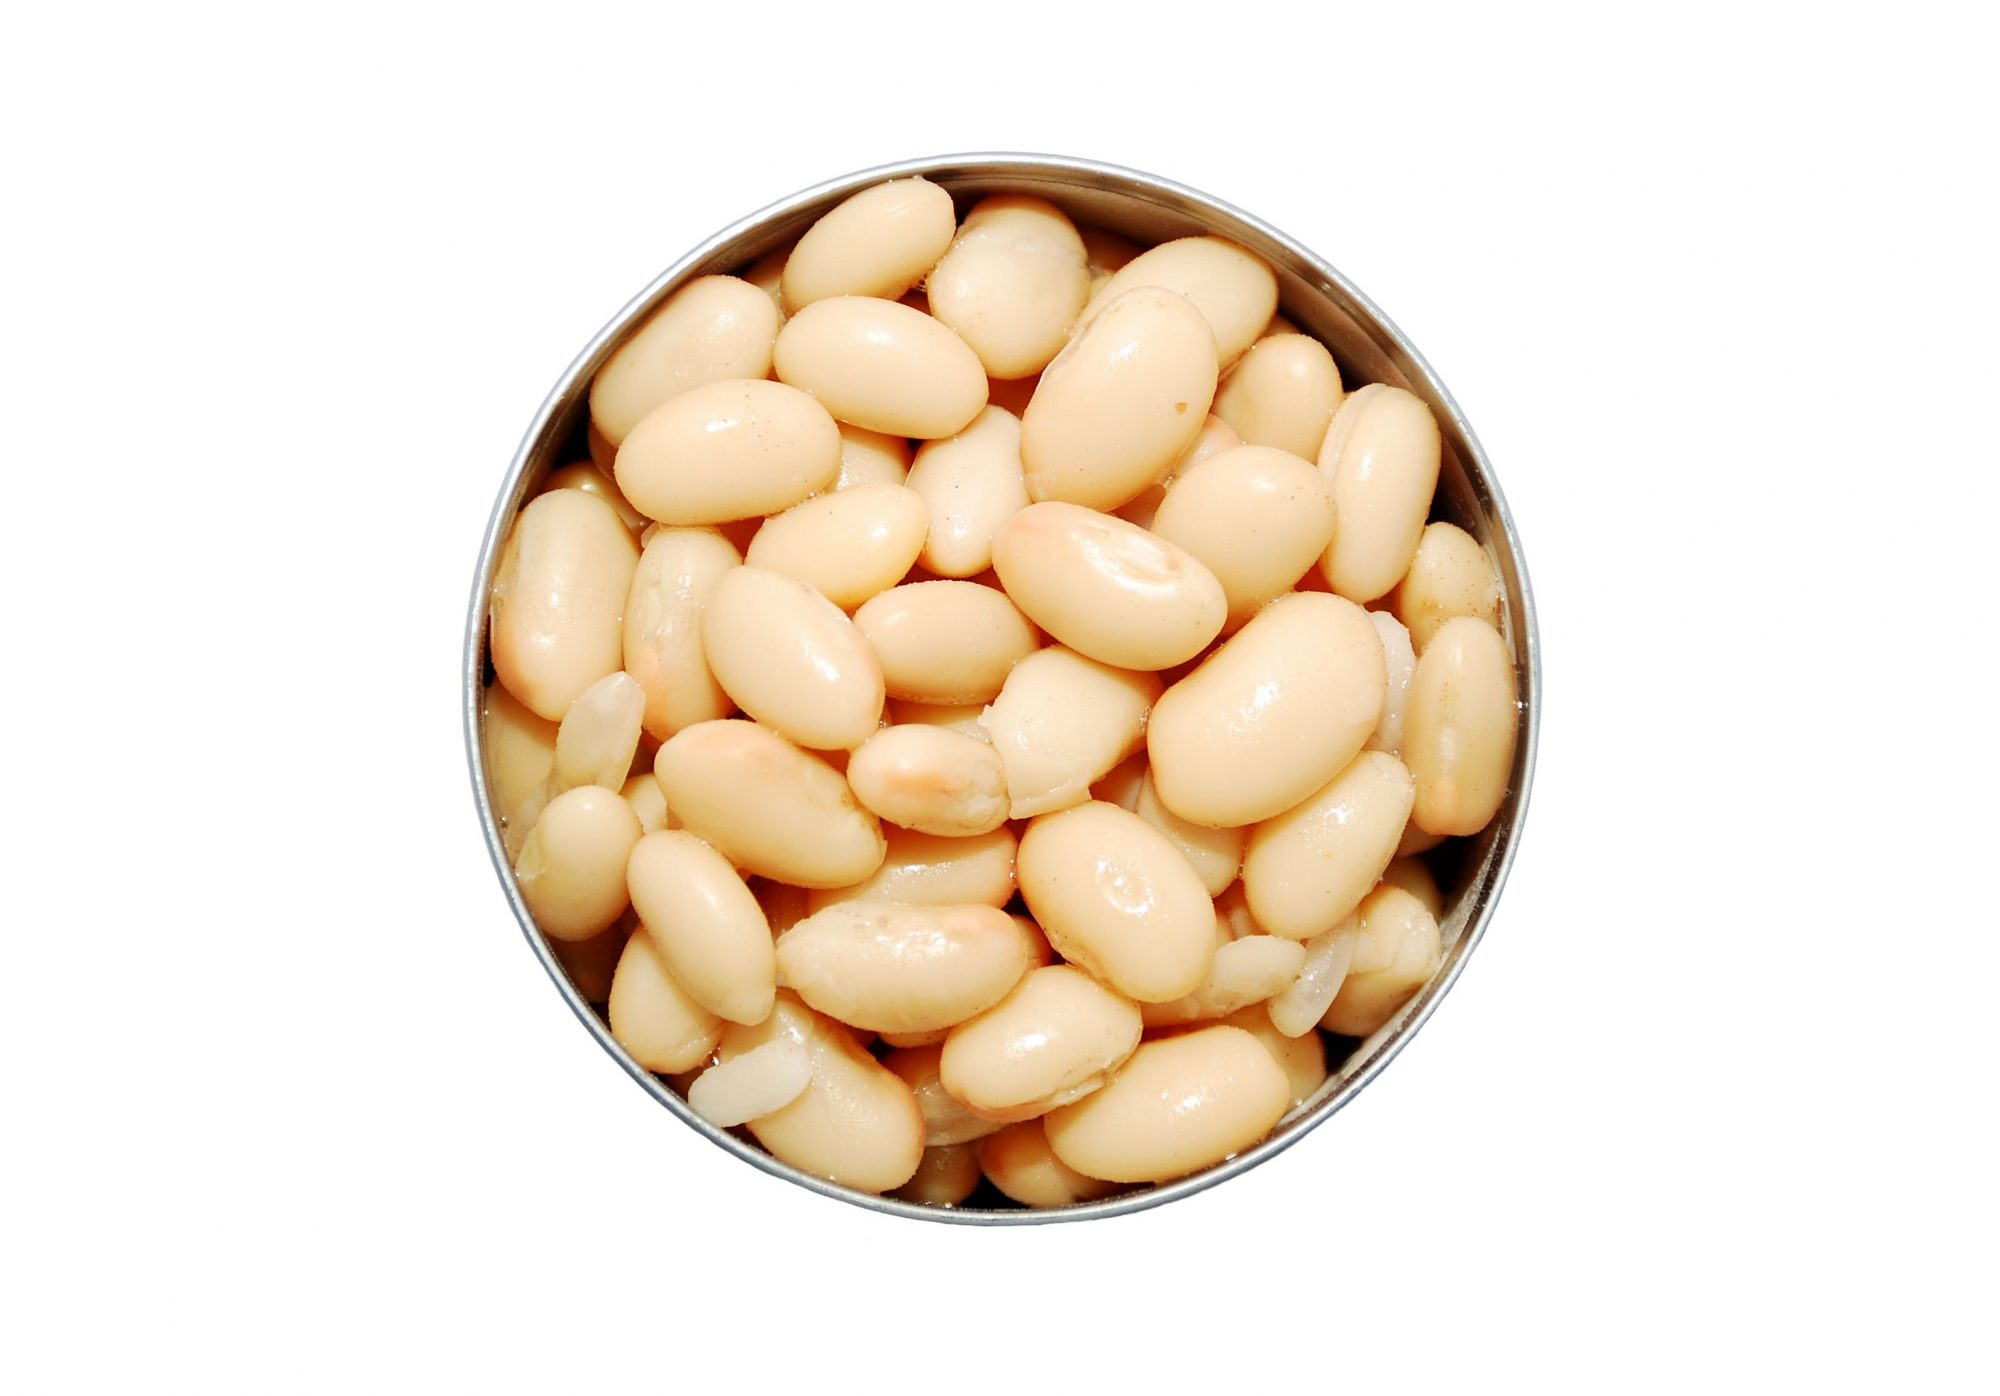 getty-canned-white-bean-image